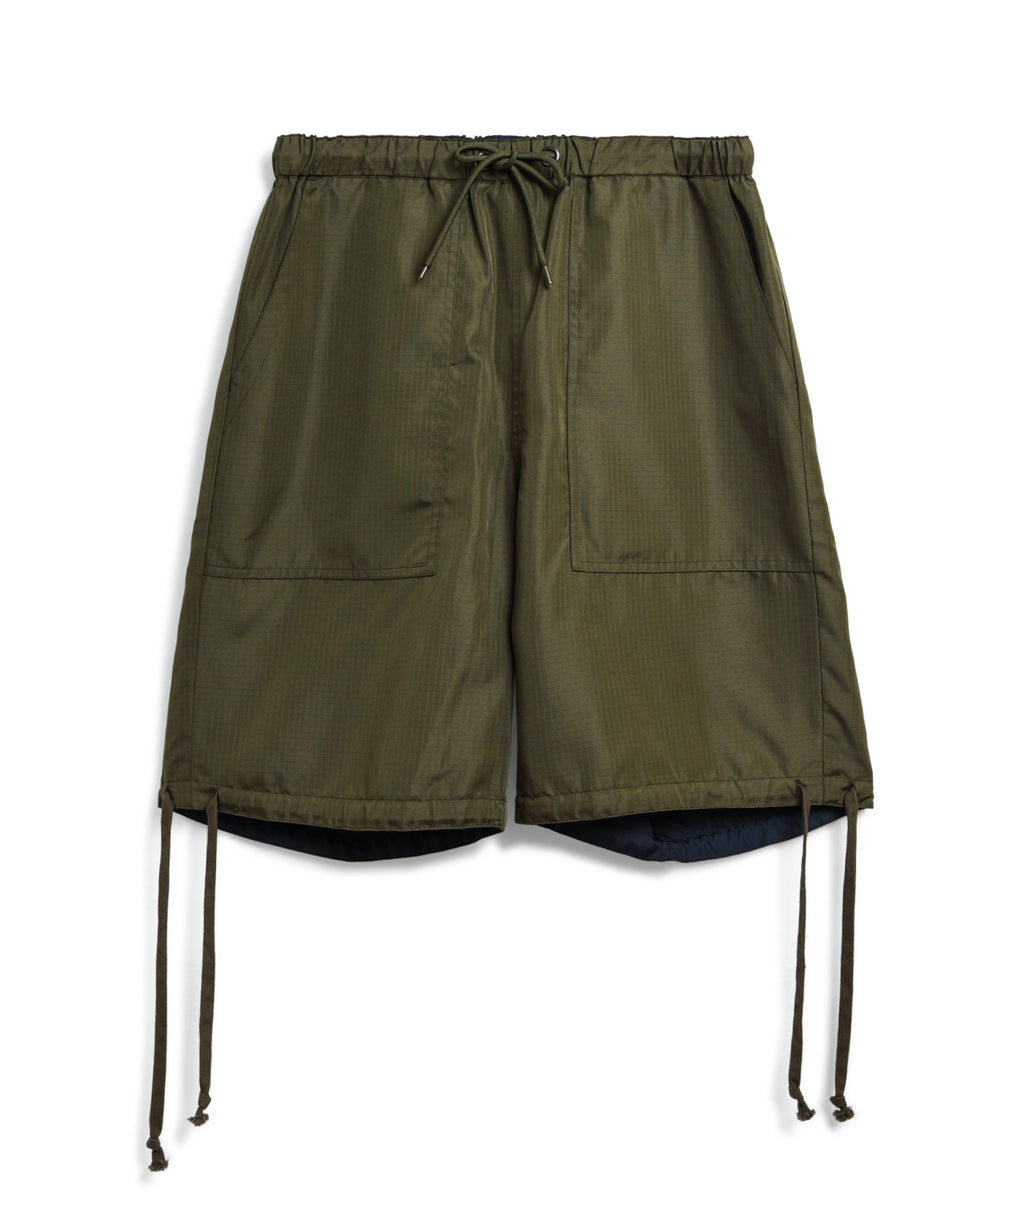 Taion Military Reversible Short Pants Dark Olive